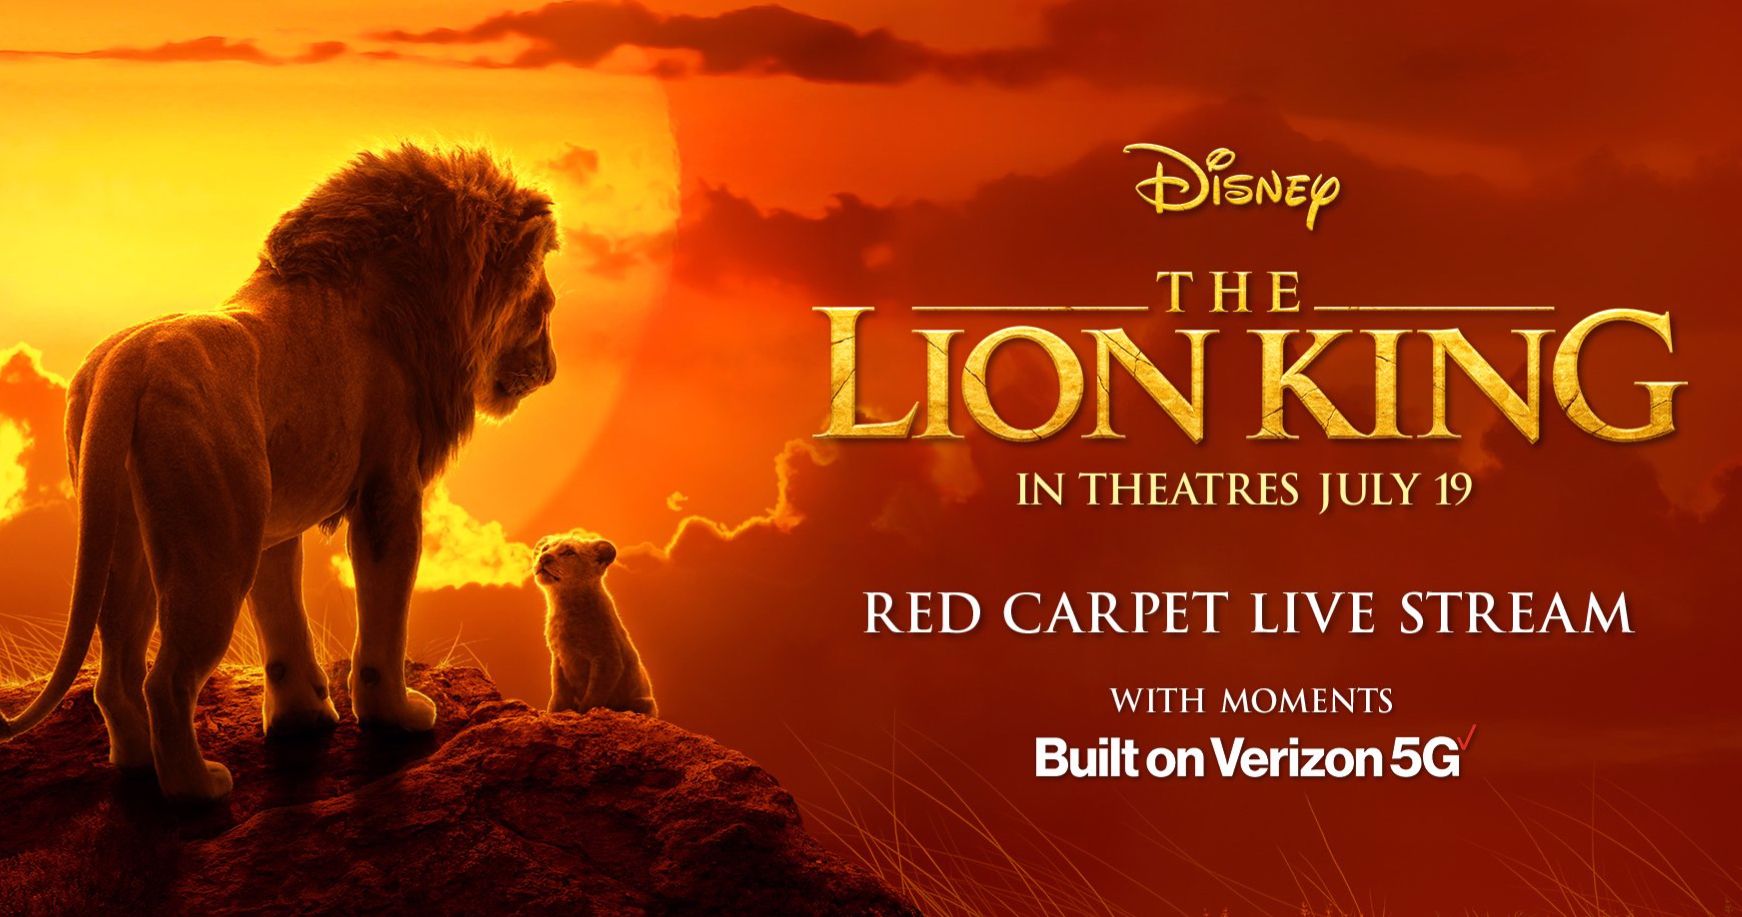 Watch The Lion King World Premiere Red Carpet Livestream Event